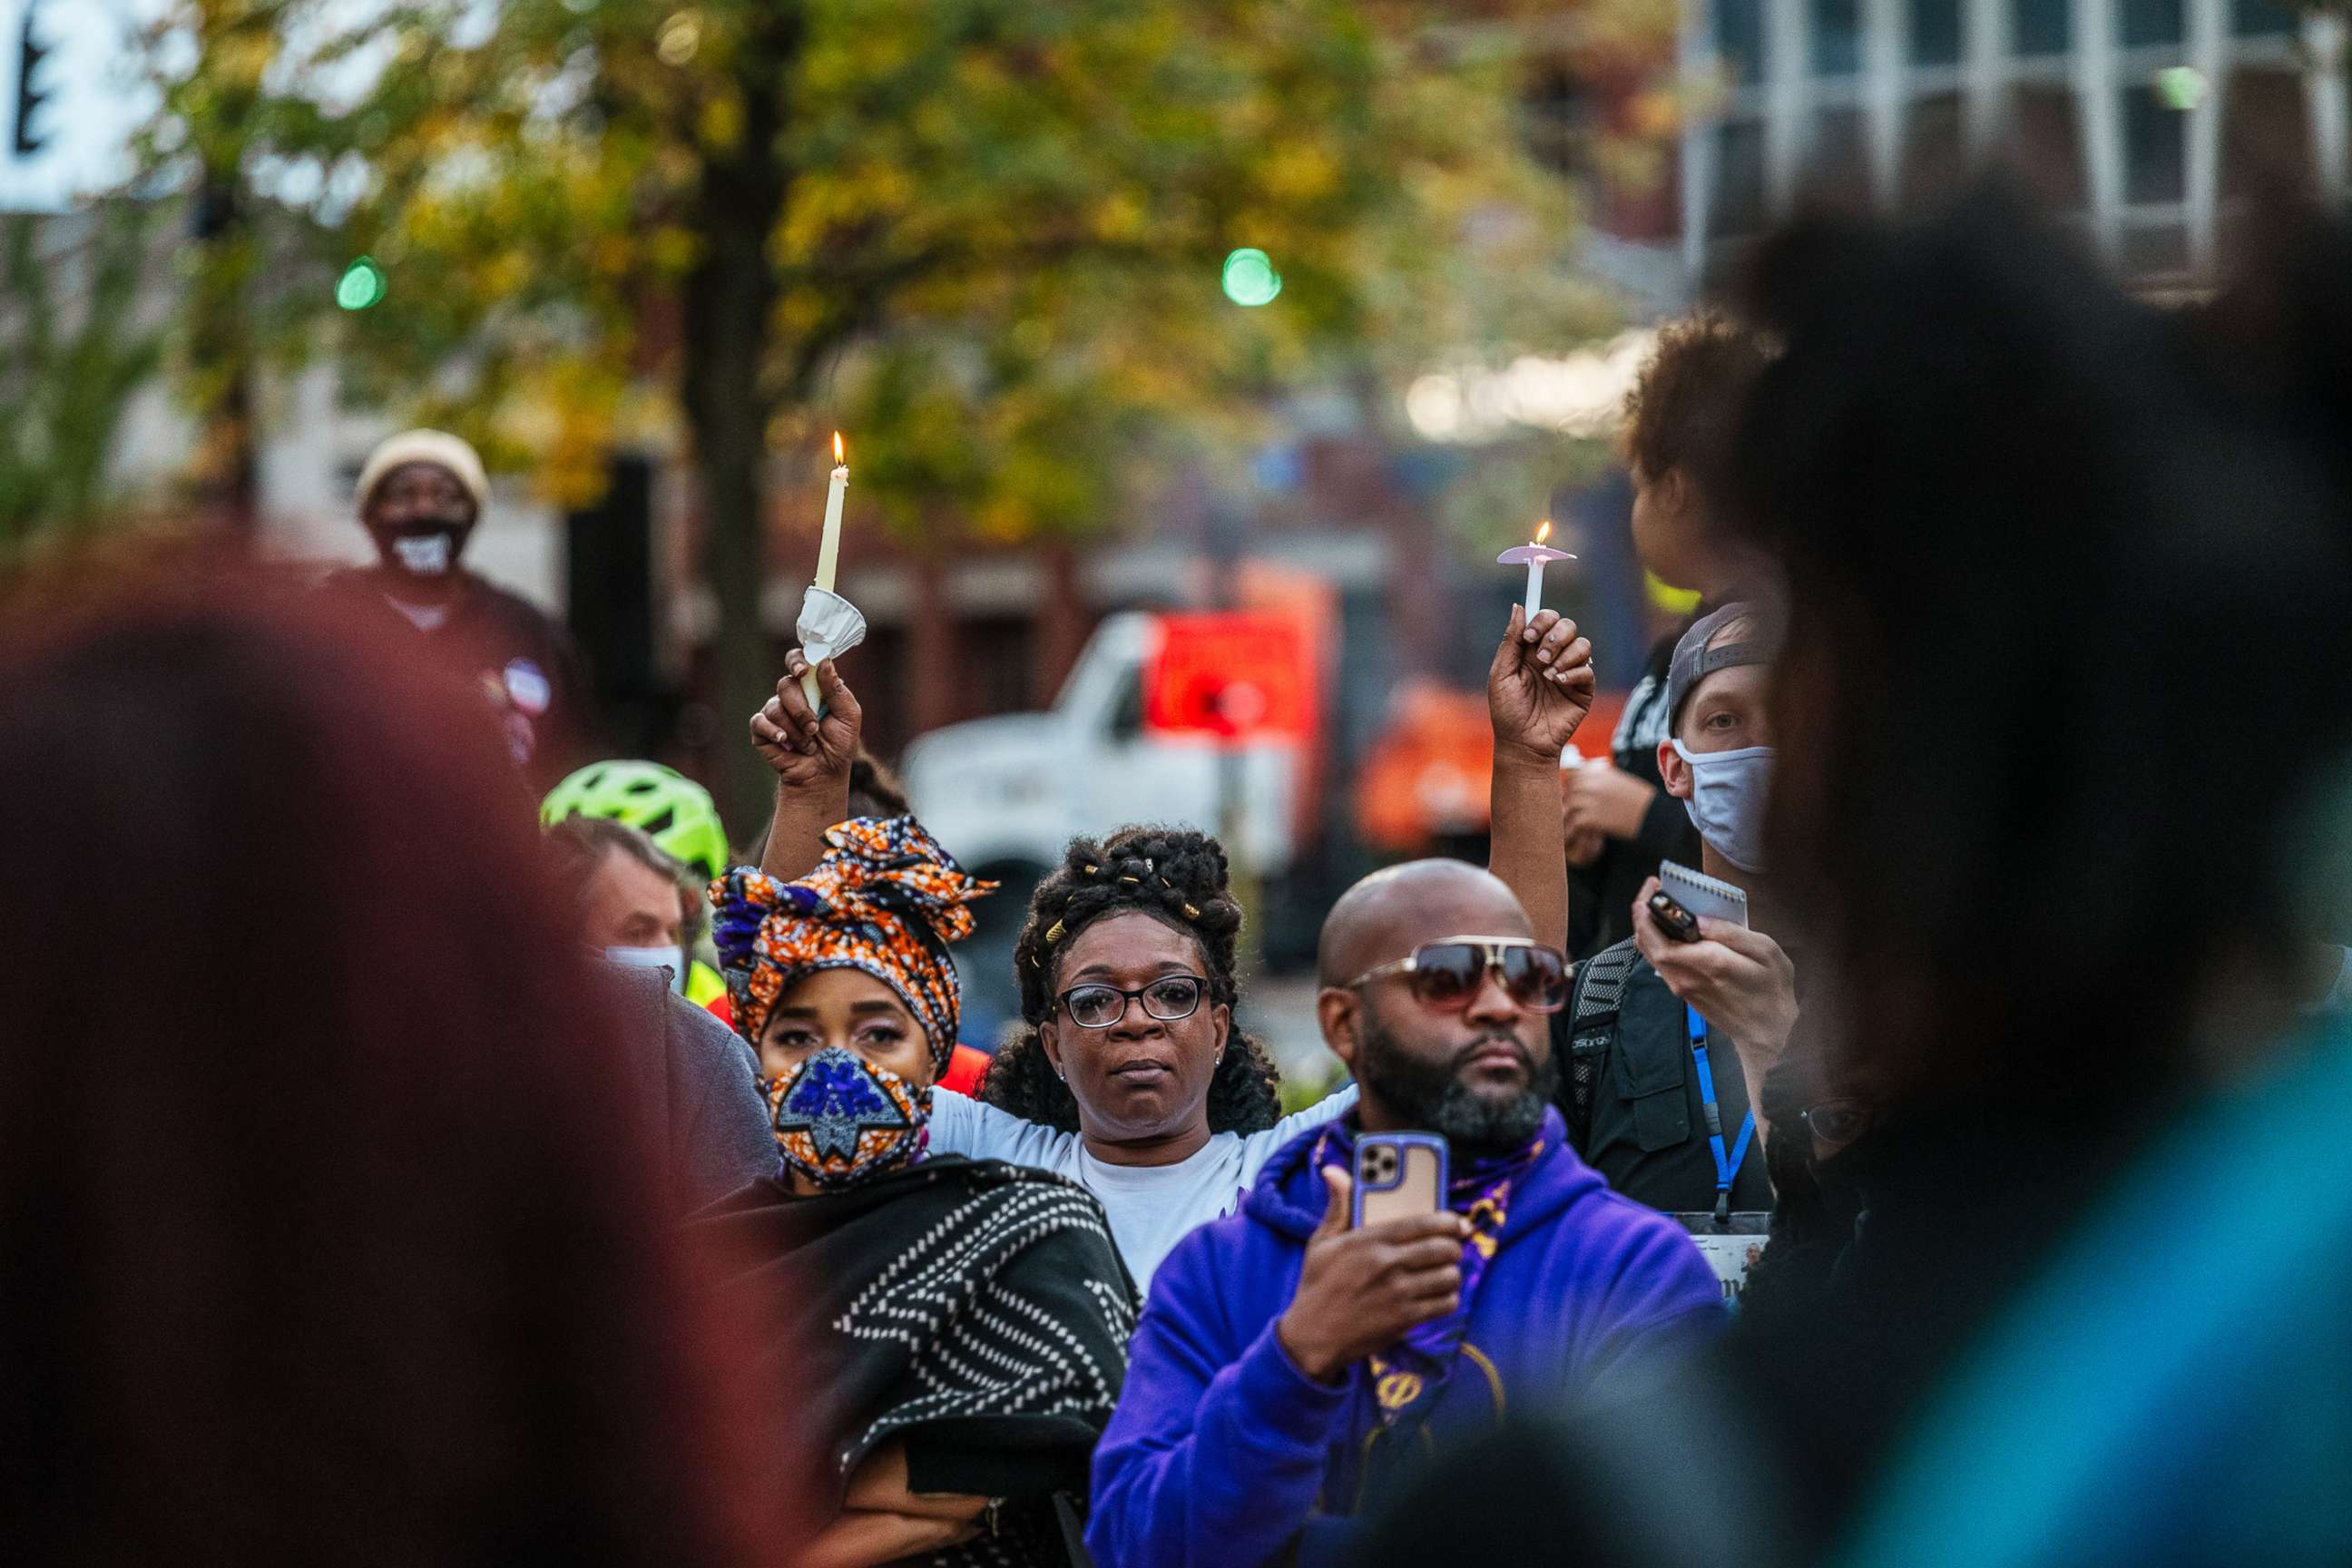 PHOTO: Demonstrators hold a candlelight vigil at the Breonna Taylor memorial at Jefferson Square Park in Louisville, Ky., Oct. 3, 2020. Jefferson Square Park remains the epicenter for Black Lives Matter protests following the killing of Breonna Taylor.